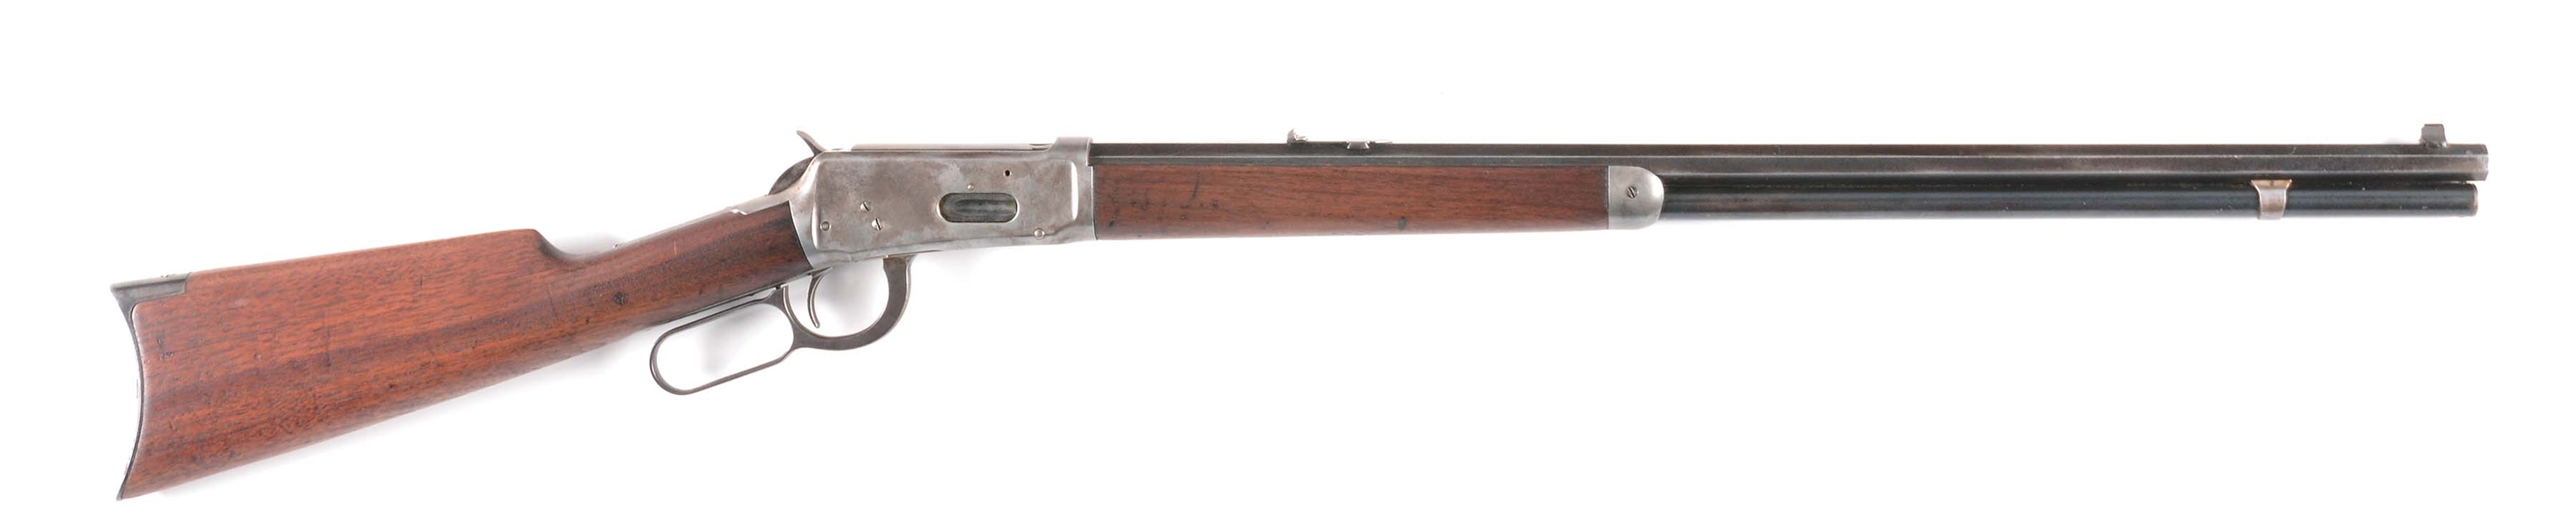 (C) WINCHESTER MODEL 1894 LEVER ACTION RIFLE (1907).